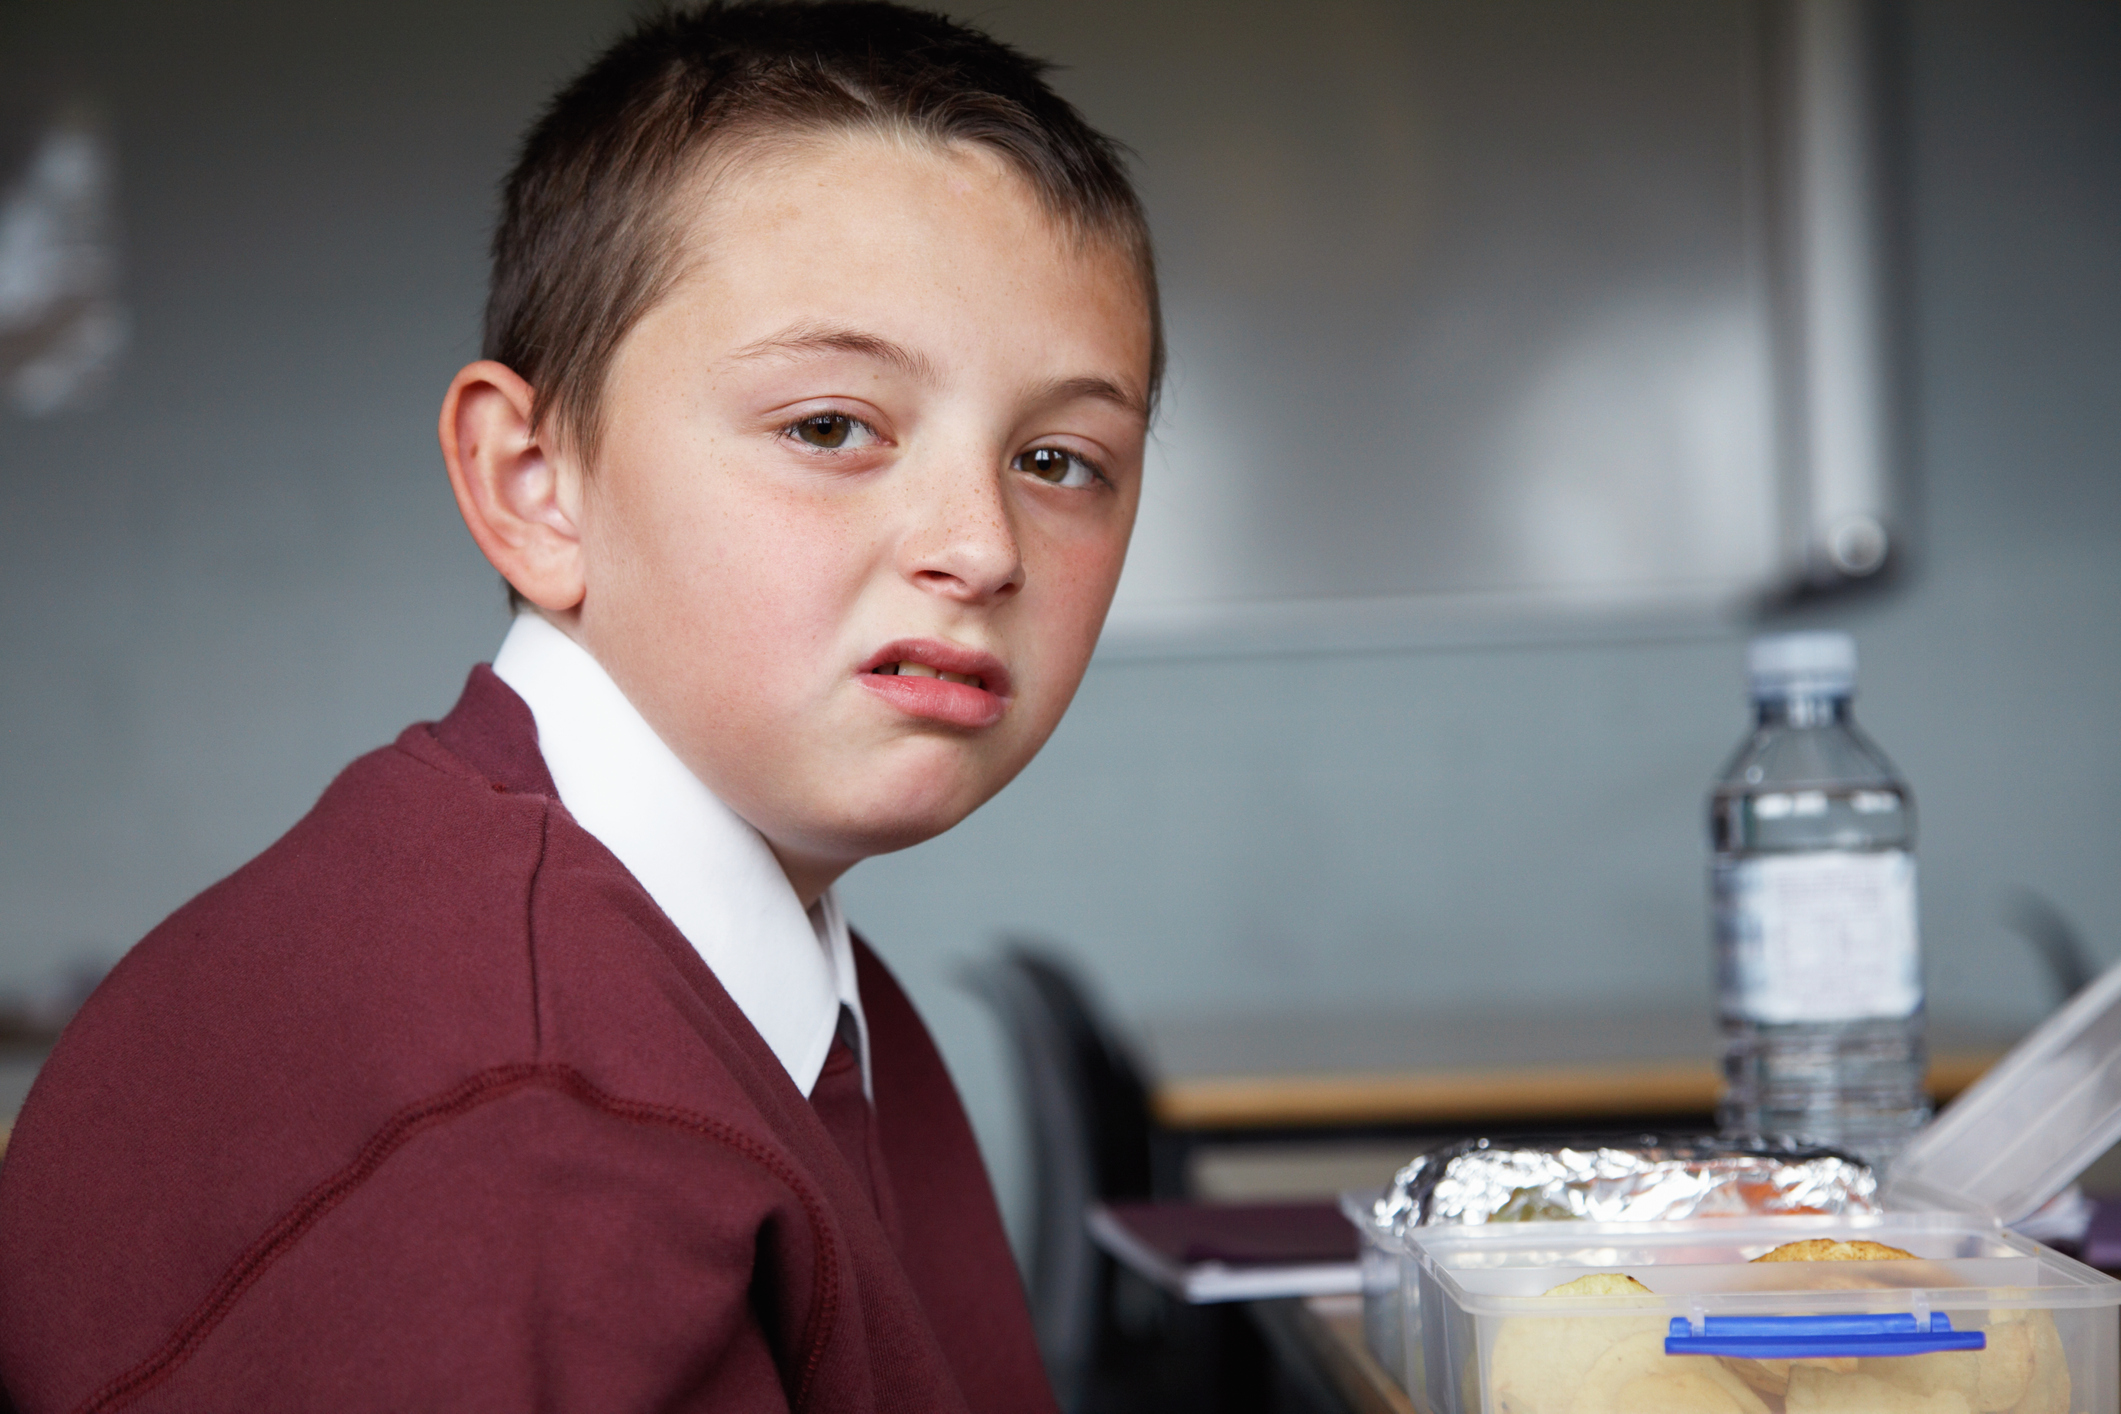 Schoolboy (8-10) desk, packed lunch on table, portrait